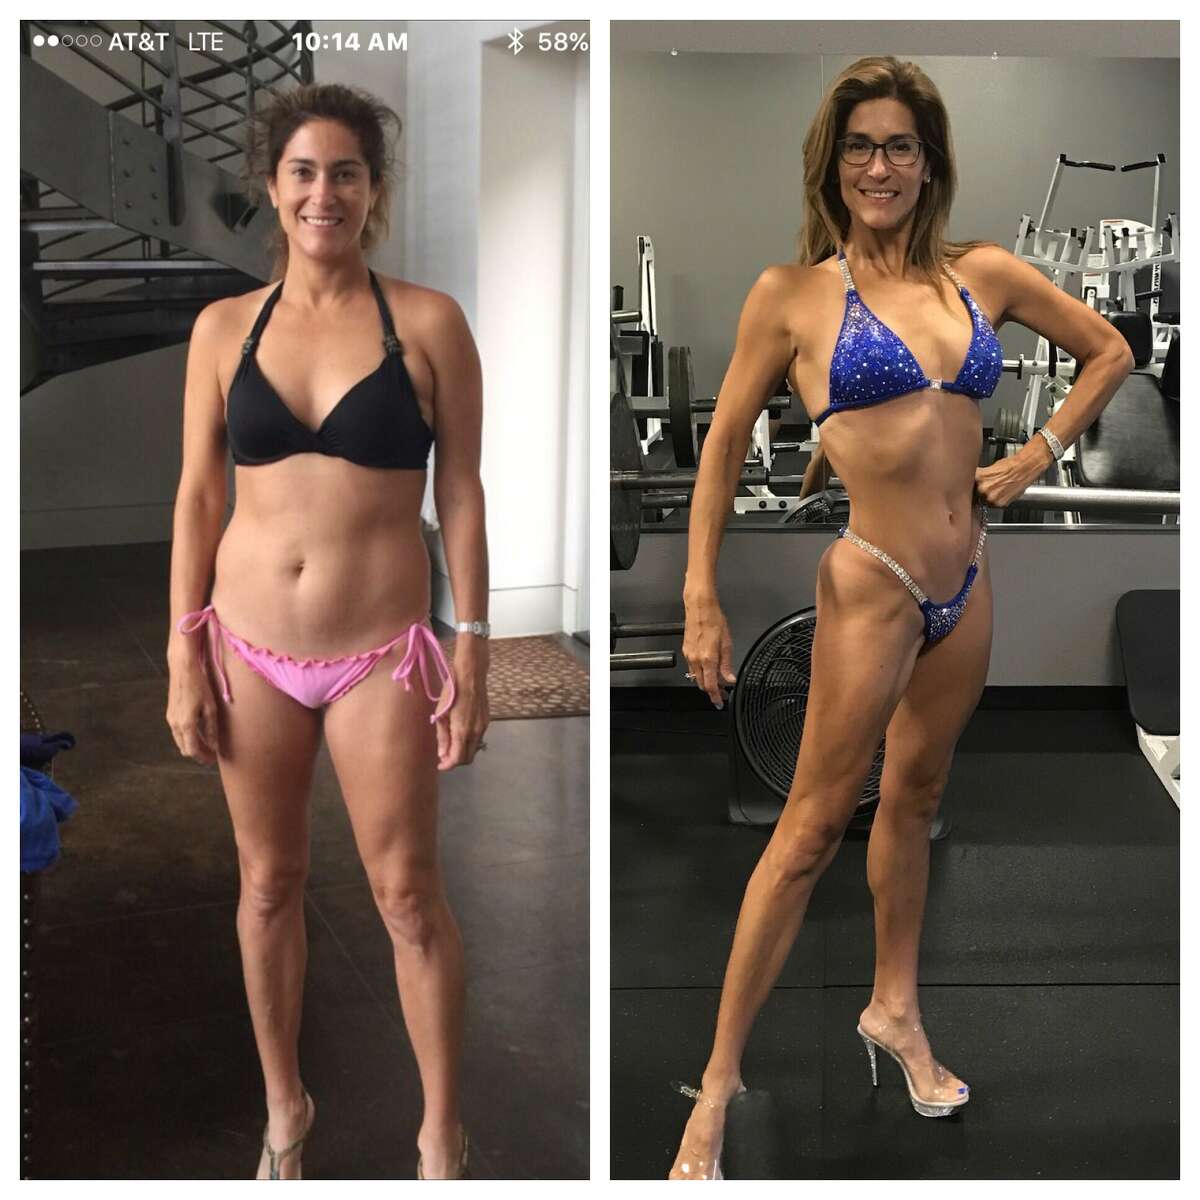 Last week, Sarah Lucero shared a drastic transformation photo showing what she looked like in February 2016 compared to July 2017. The "after" shot reveals the toned physique Lucero has working on over the last two years.